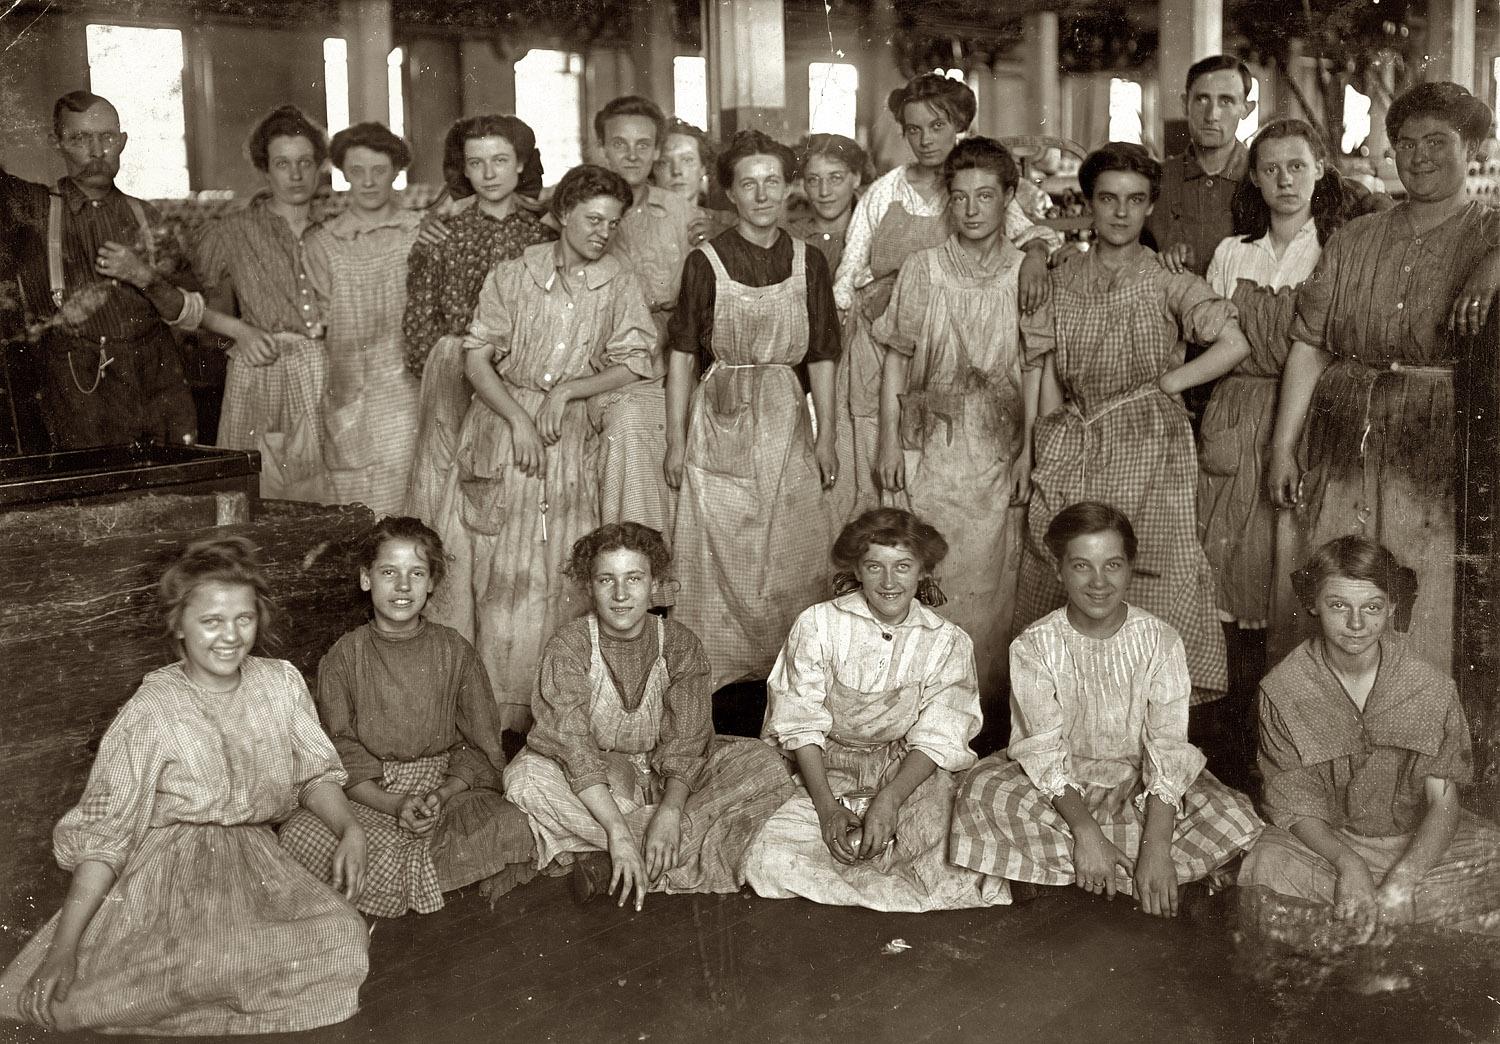 August 1908. "Noon hour in an Indianapolis cotton mill. Witness, E.N. Clopper." View full size. Photograph and caption by Lewis Wickes Hine.